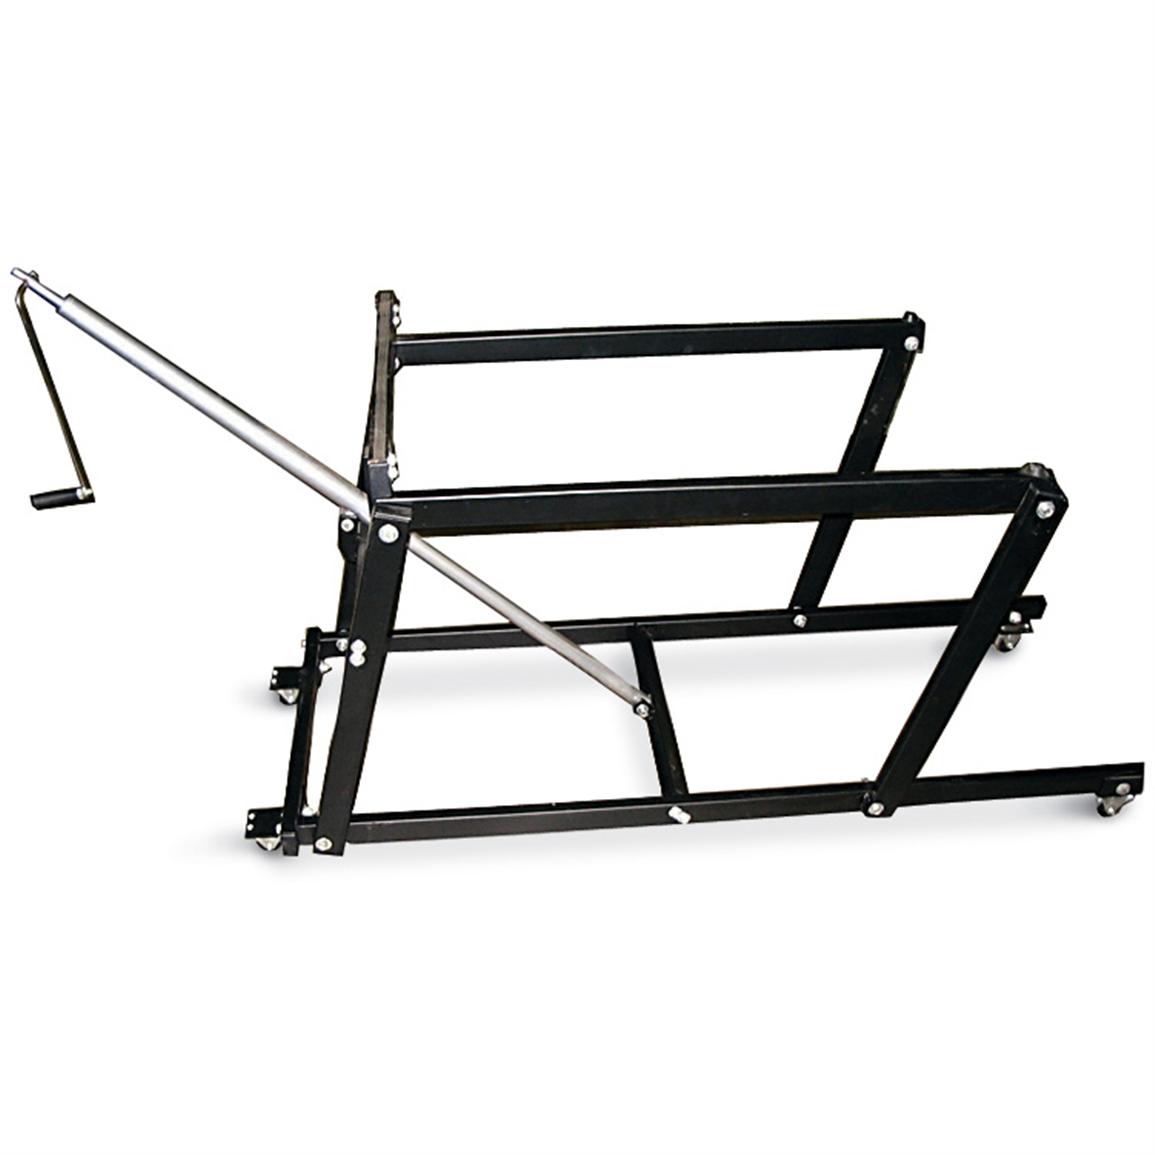 Sled Lift - 128110, Snowmobile Accessories at Sportsman's Guide